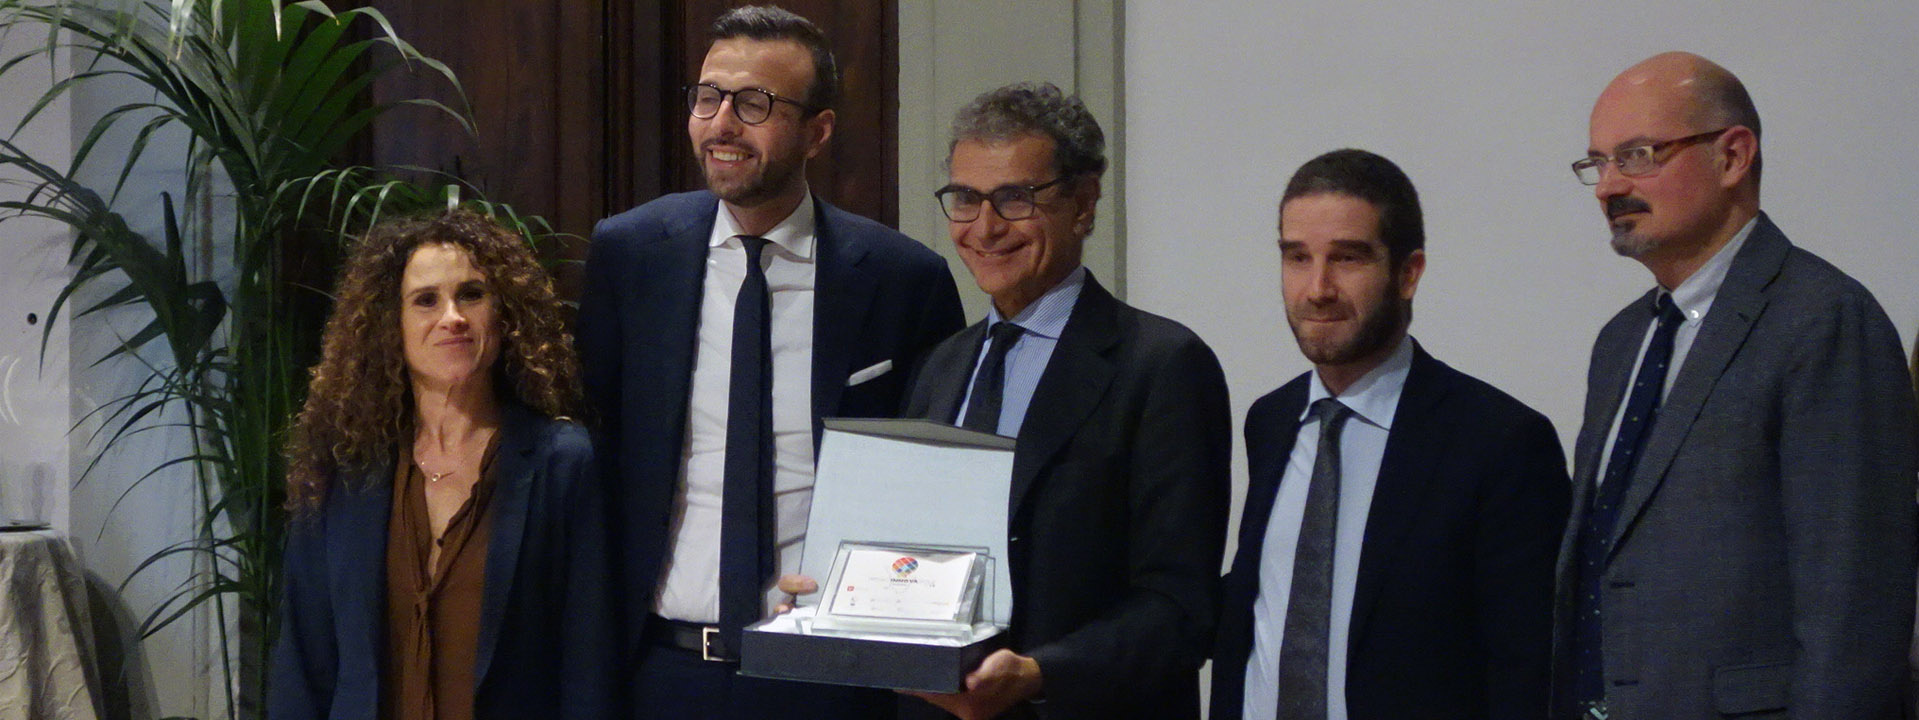 Cisa Group wins first place in Tuscany for research & development ...